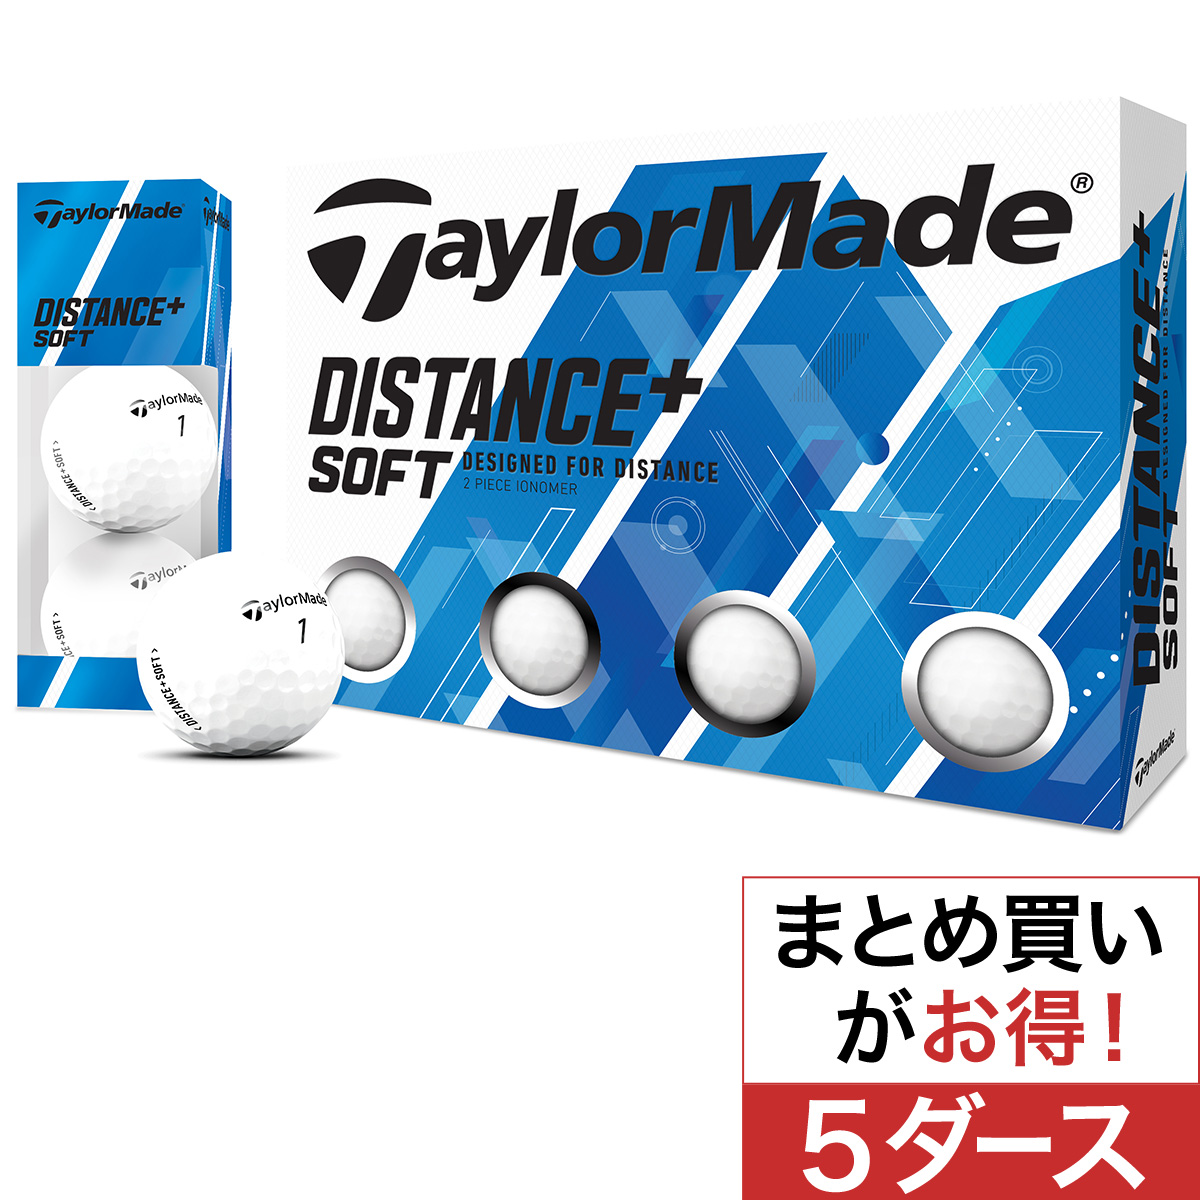  Distance+Soft ボール 5ダースセット 